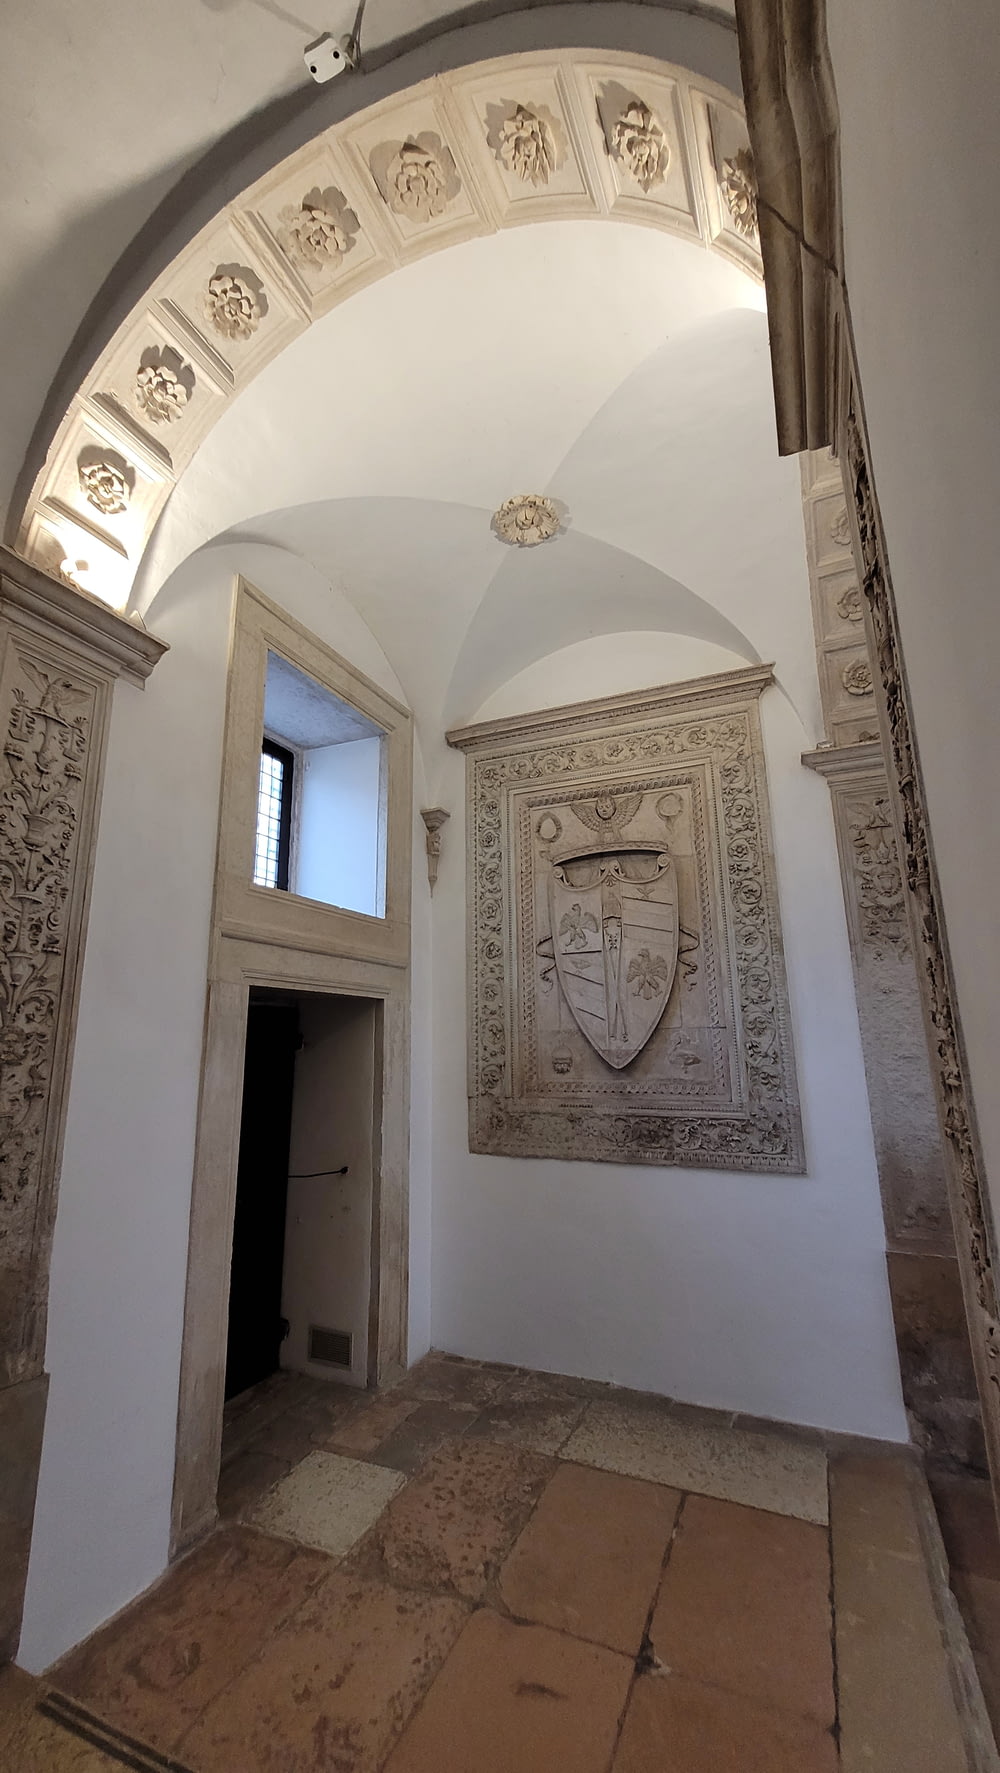 an archway leading to a room with a coat of arms on the wall